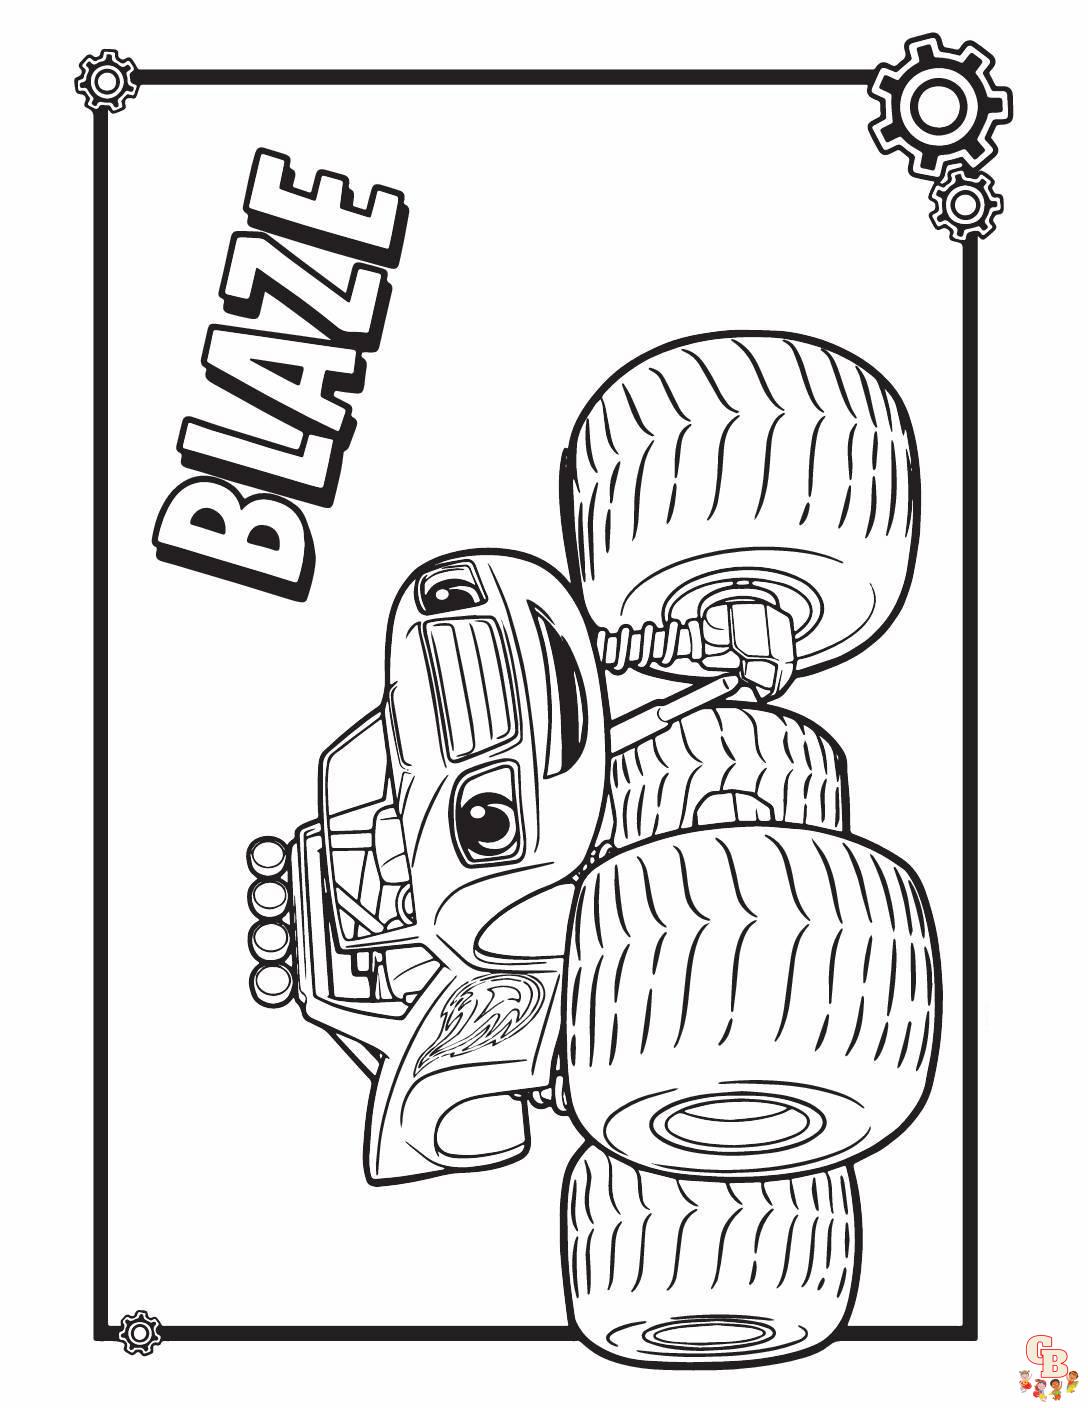 Blaze coloring pages 17